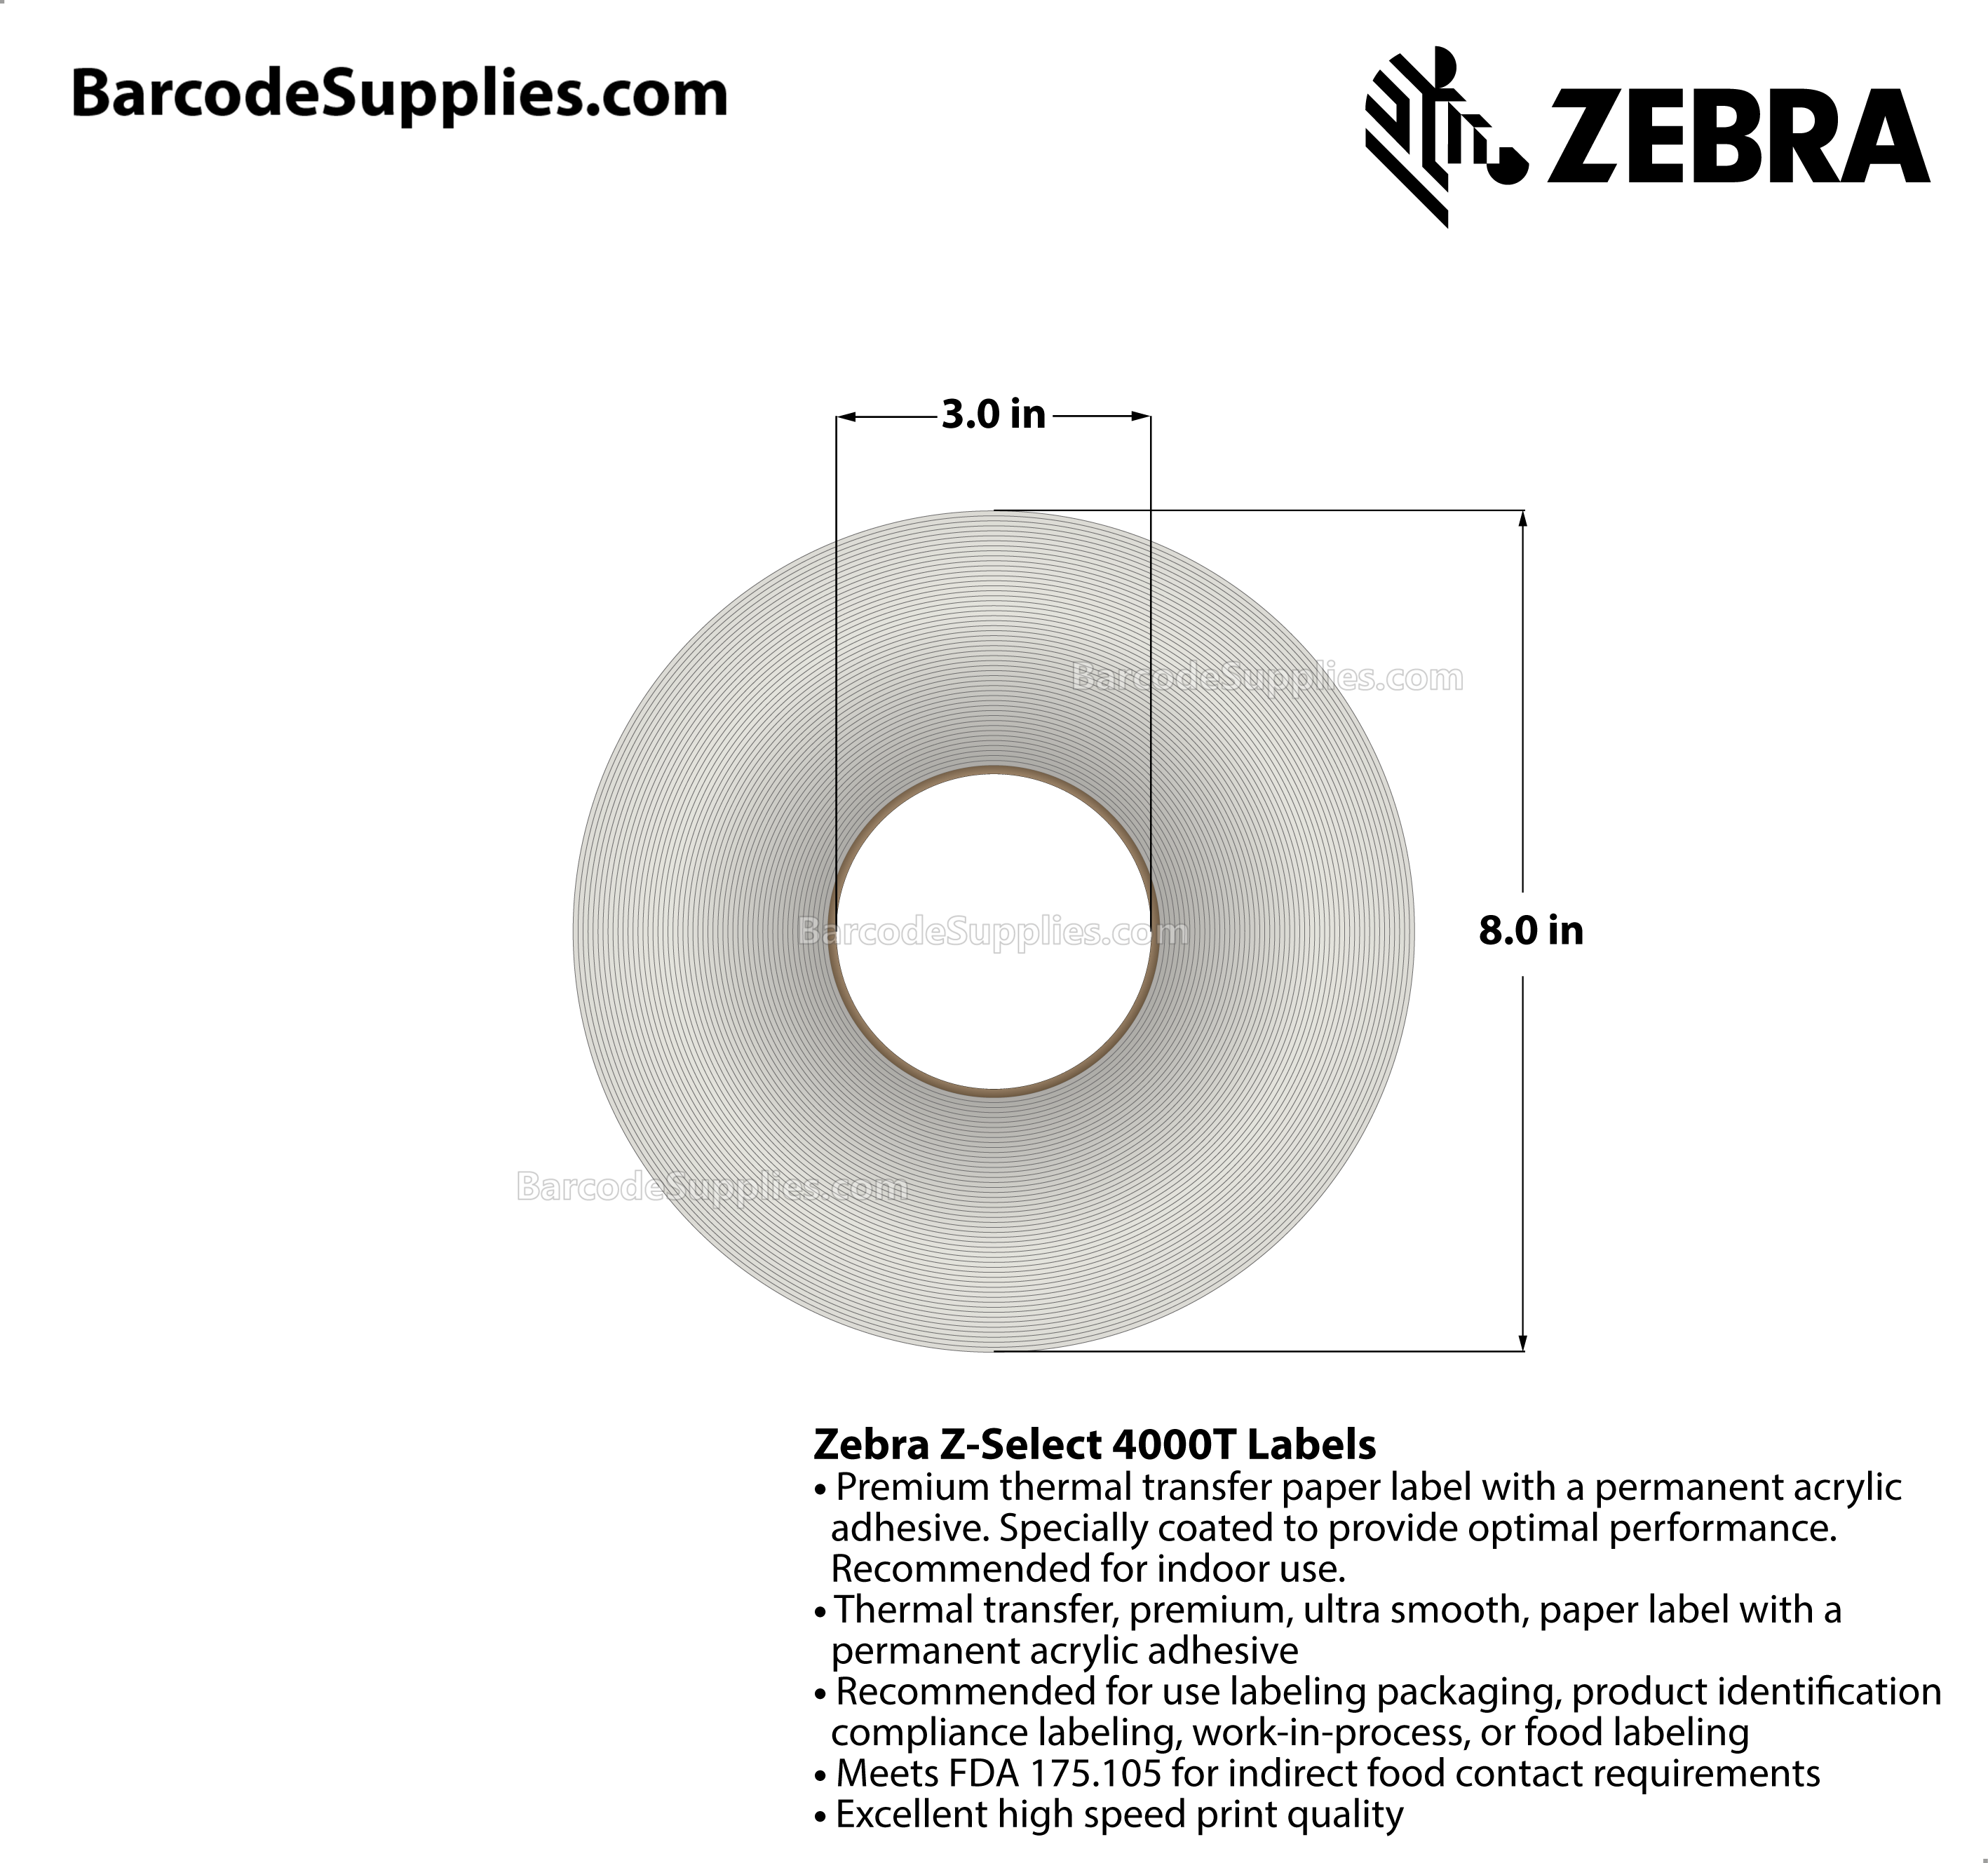 5 x 486' Thermal Transfer White Z-Select 4000T Labels With Permanent Adhesive - Continuous - Labels Per Roll - Carton Of 4 Rolls - 0 Labels Total - MPN: 72300